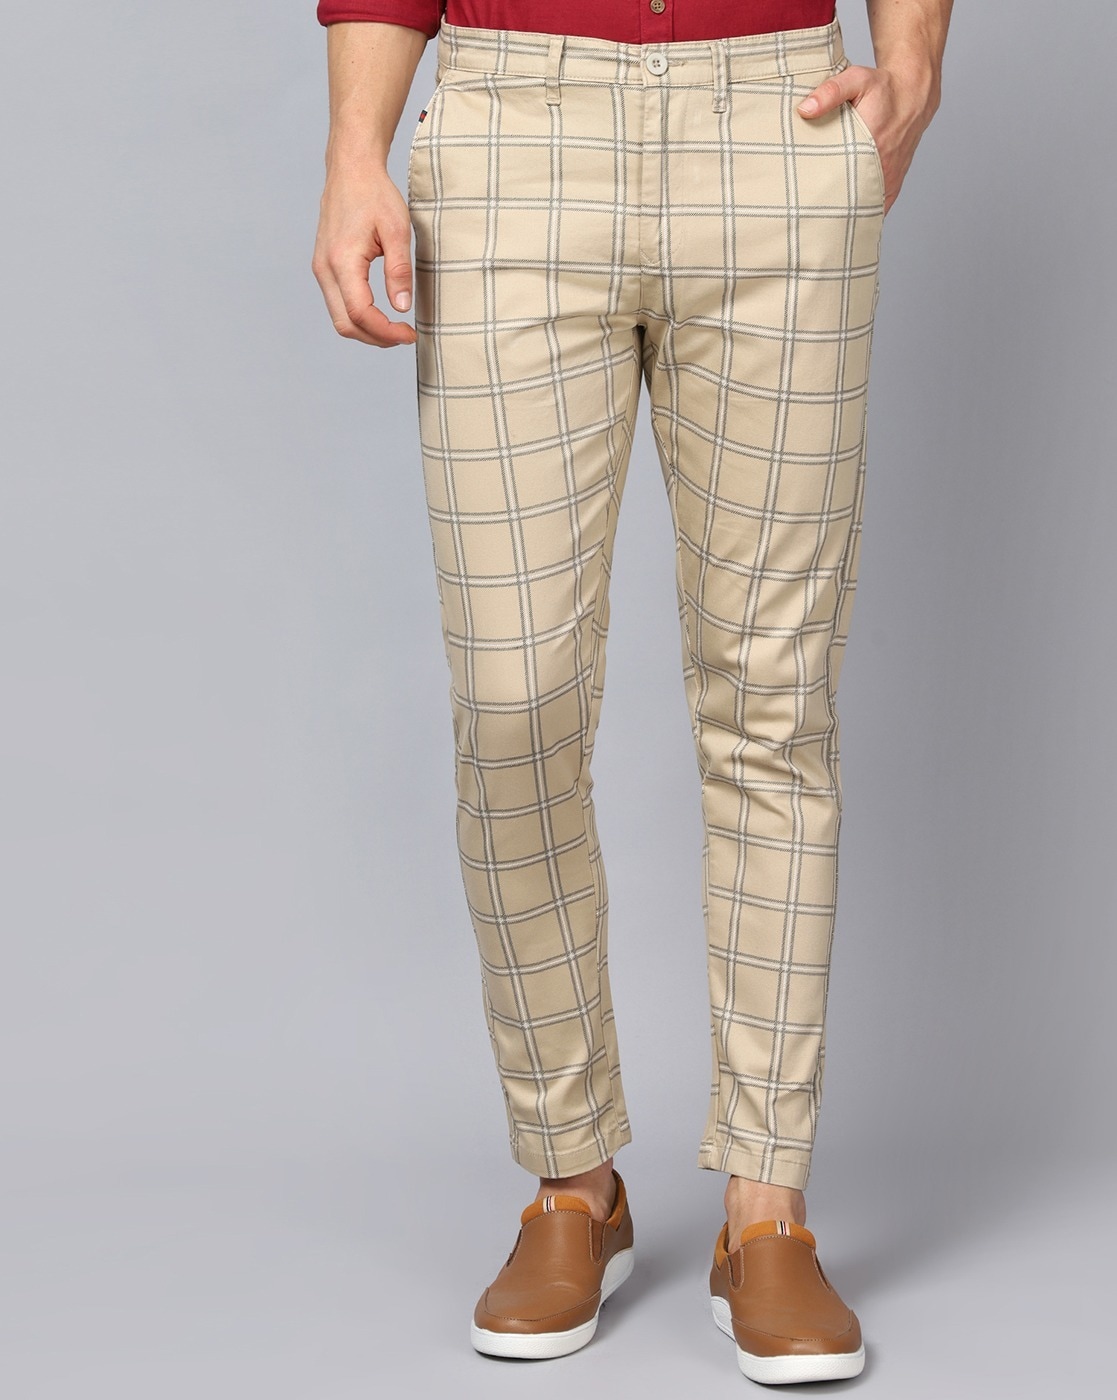 Moss Bros pants with windowpane check in gray  ShopStyle Chinos  Khakis